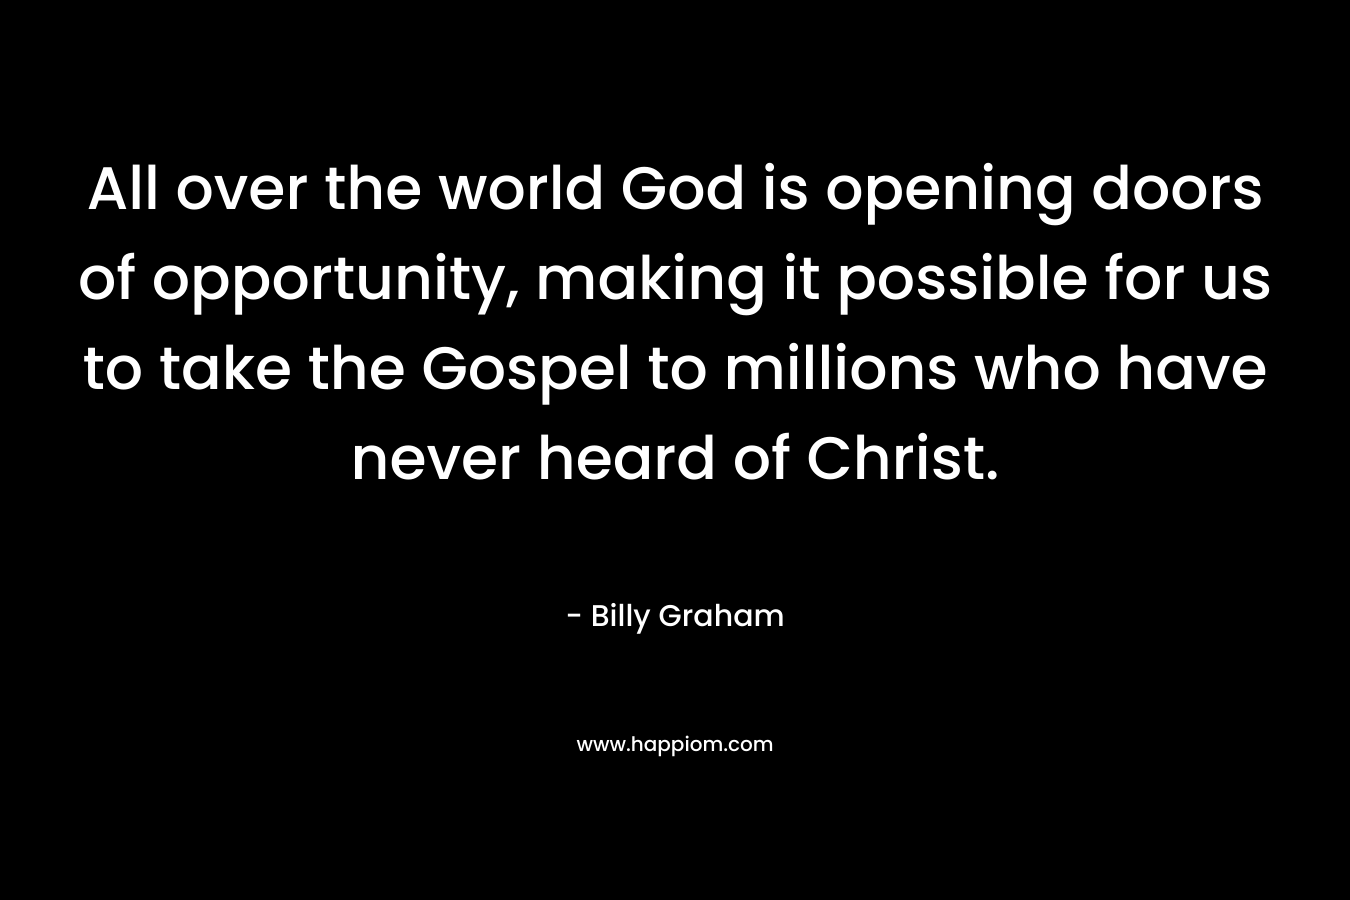 All over the world God is opening doors of opportunity, making it possible for us to take the Gospel to millions who have never heard of Christ. – Billy Graham